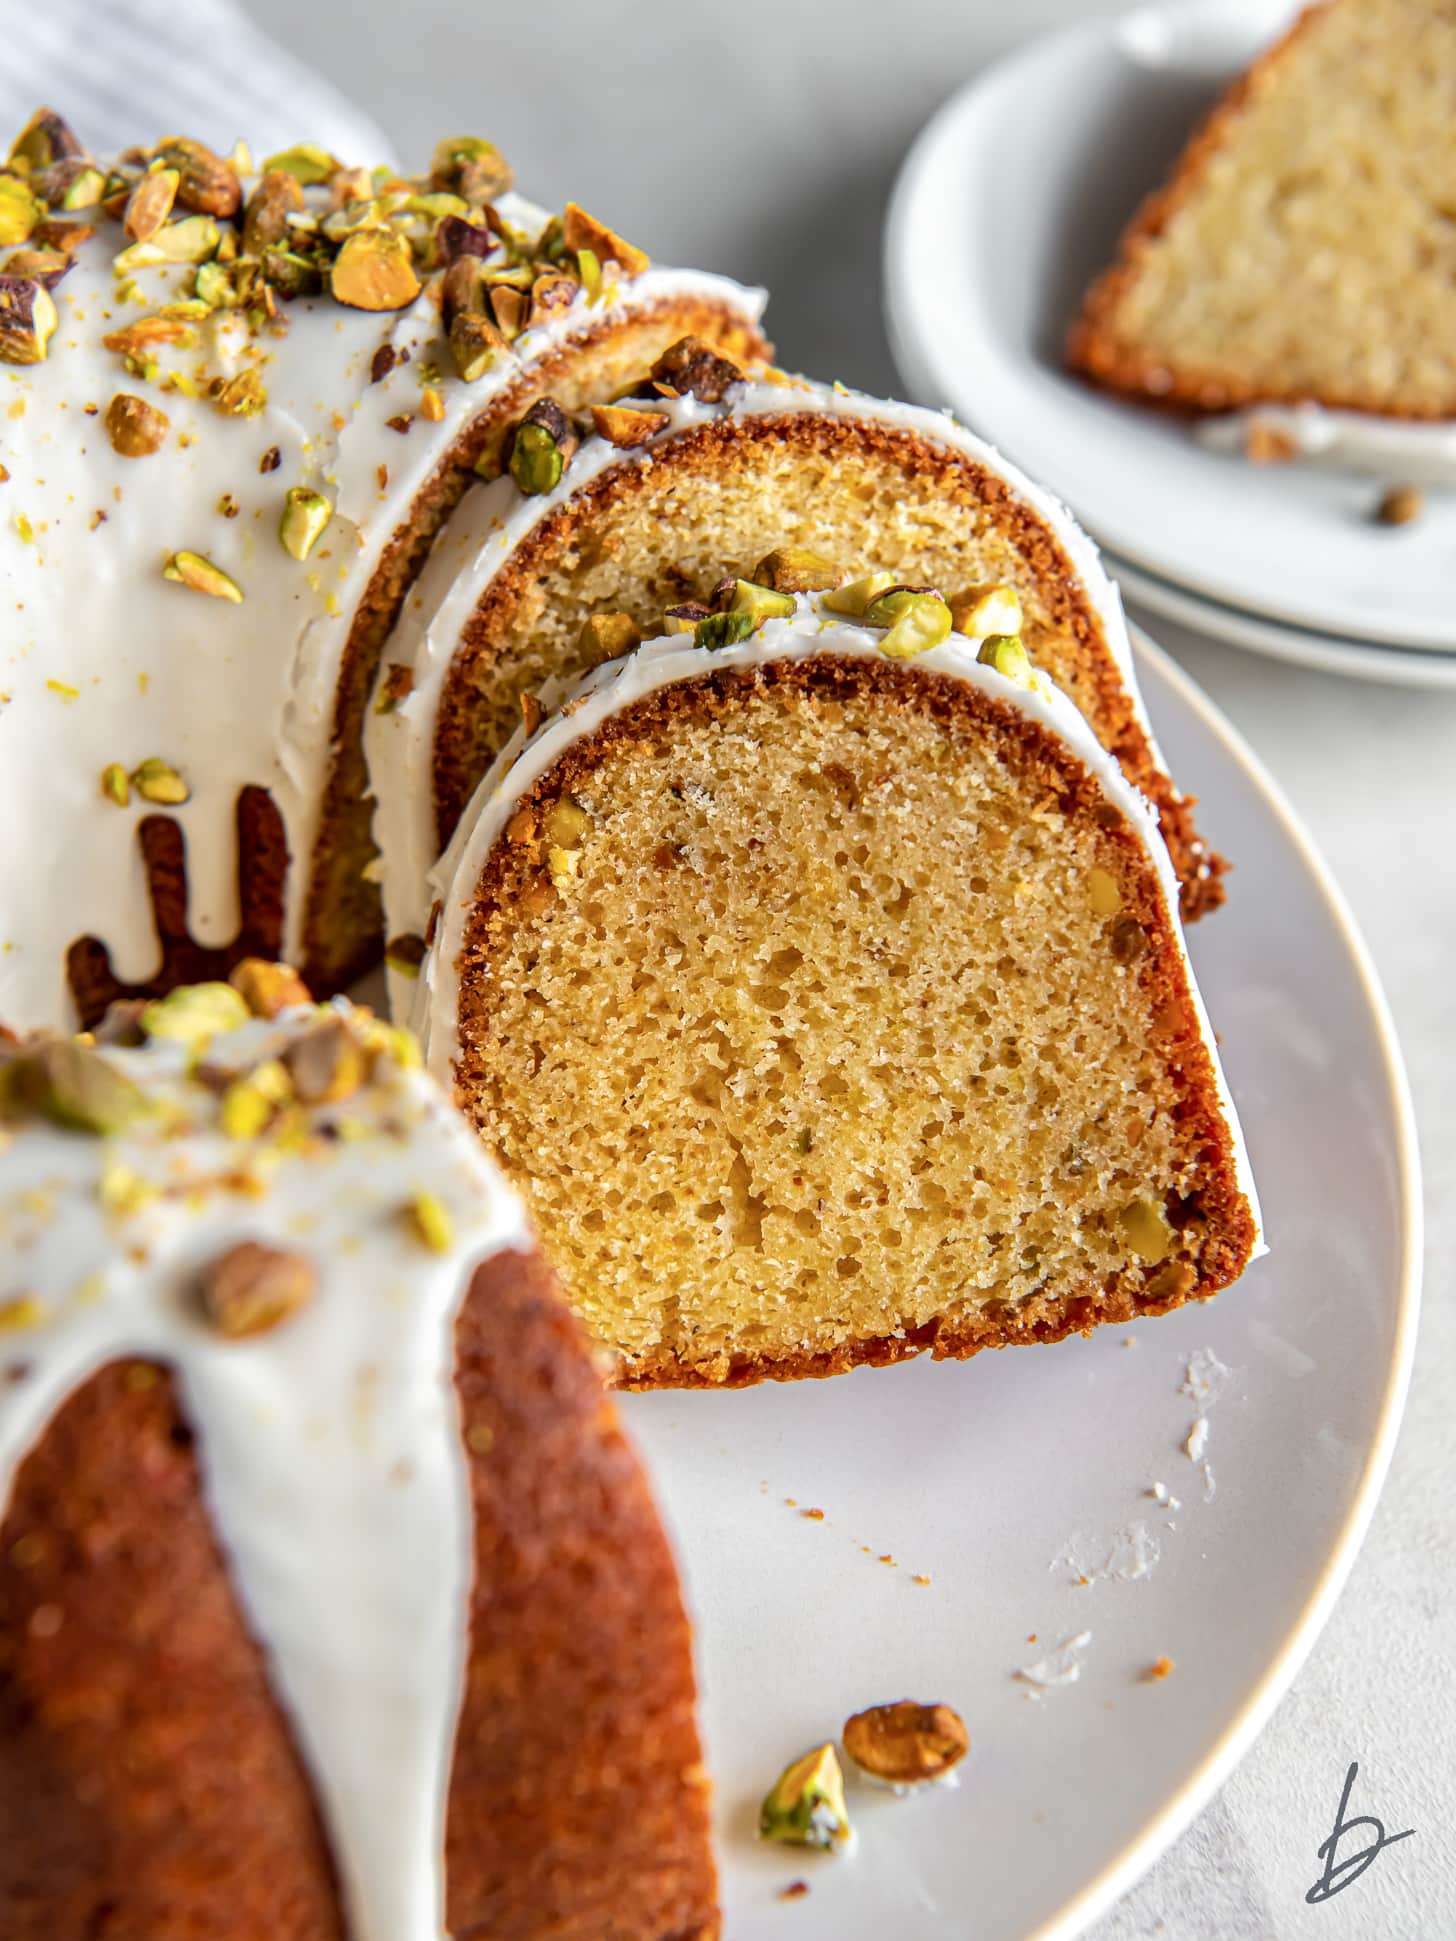 slices of pistachio bundt cake leaning against each other and cake on plate.